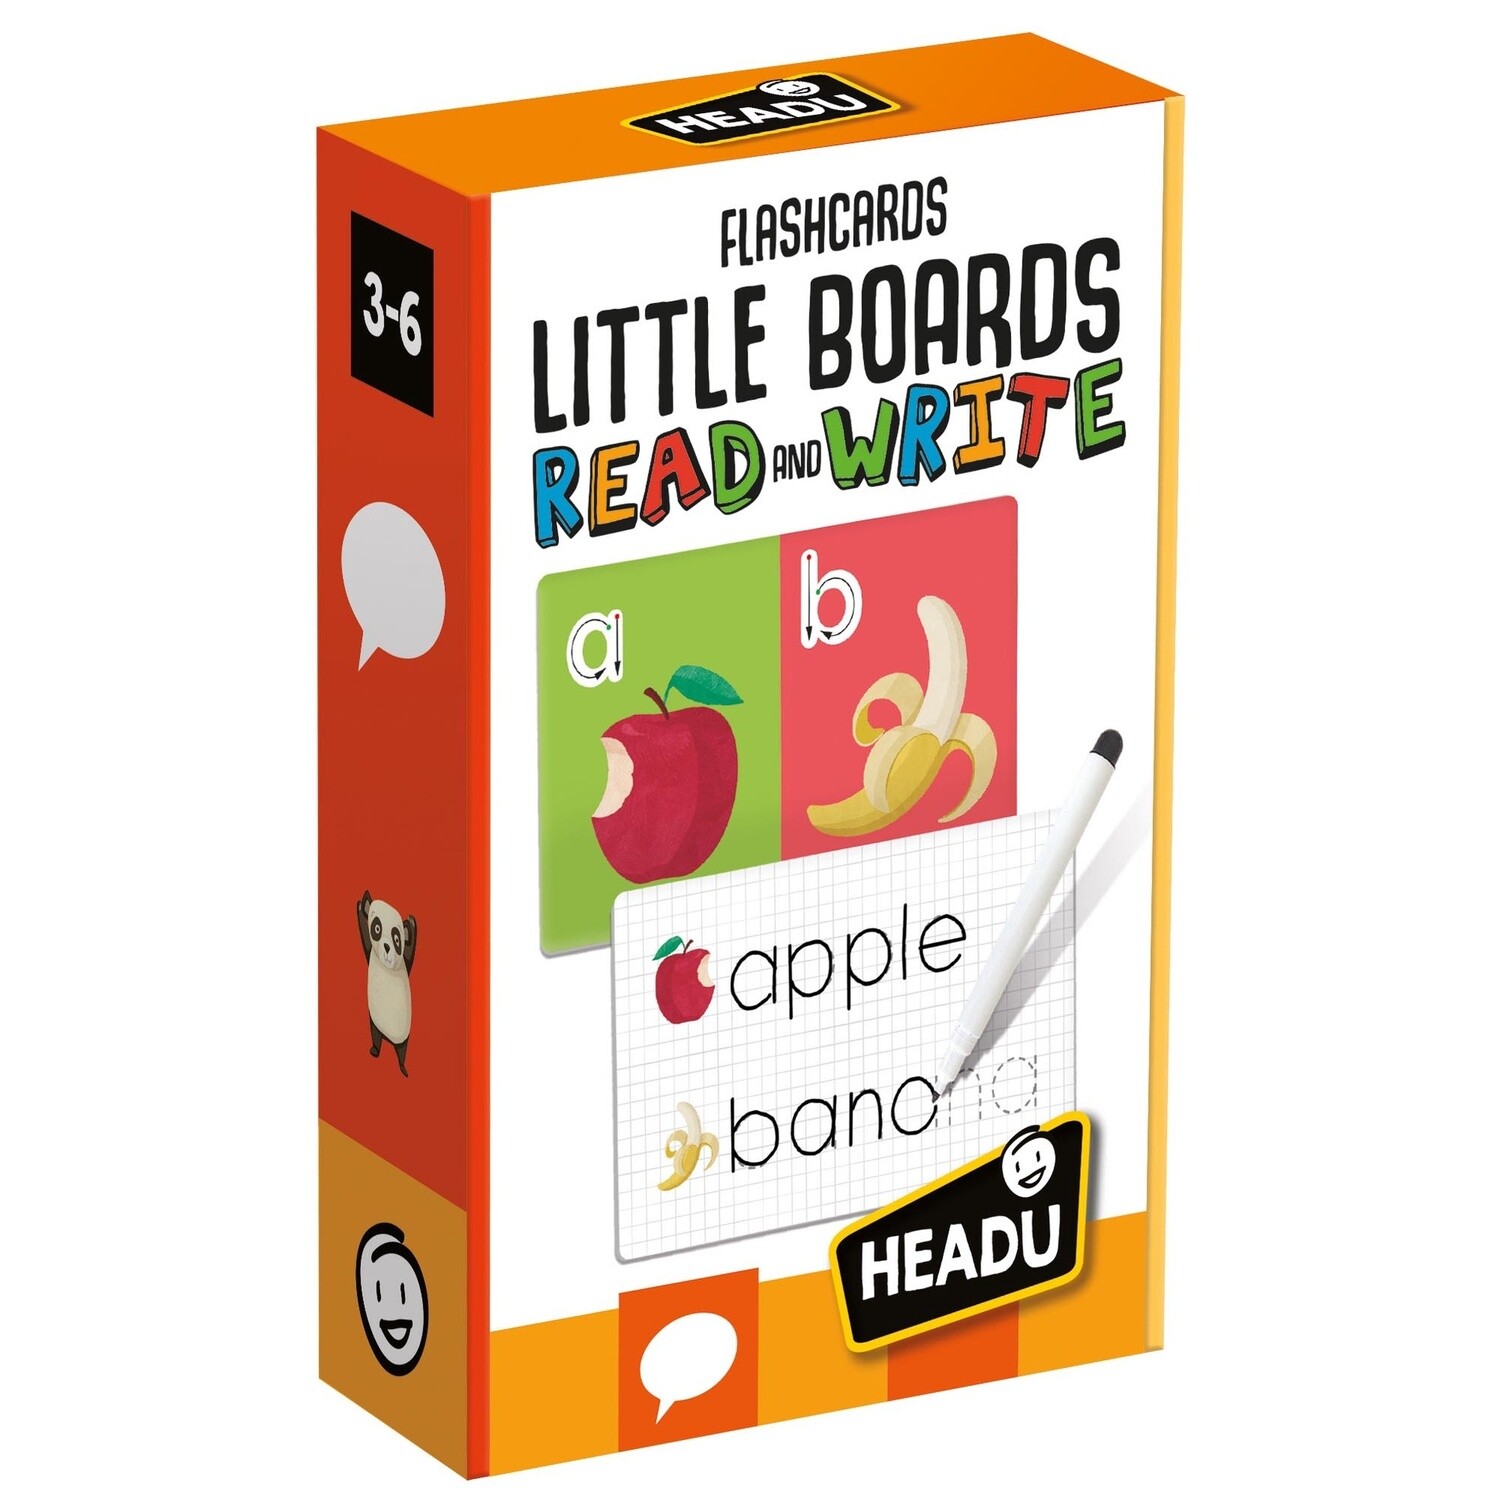 Flashcards Little Boards Read and Write